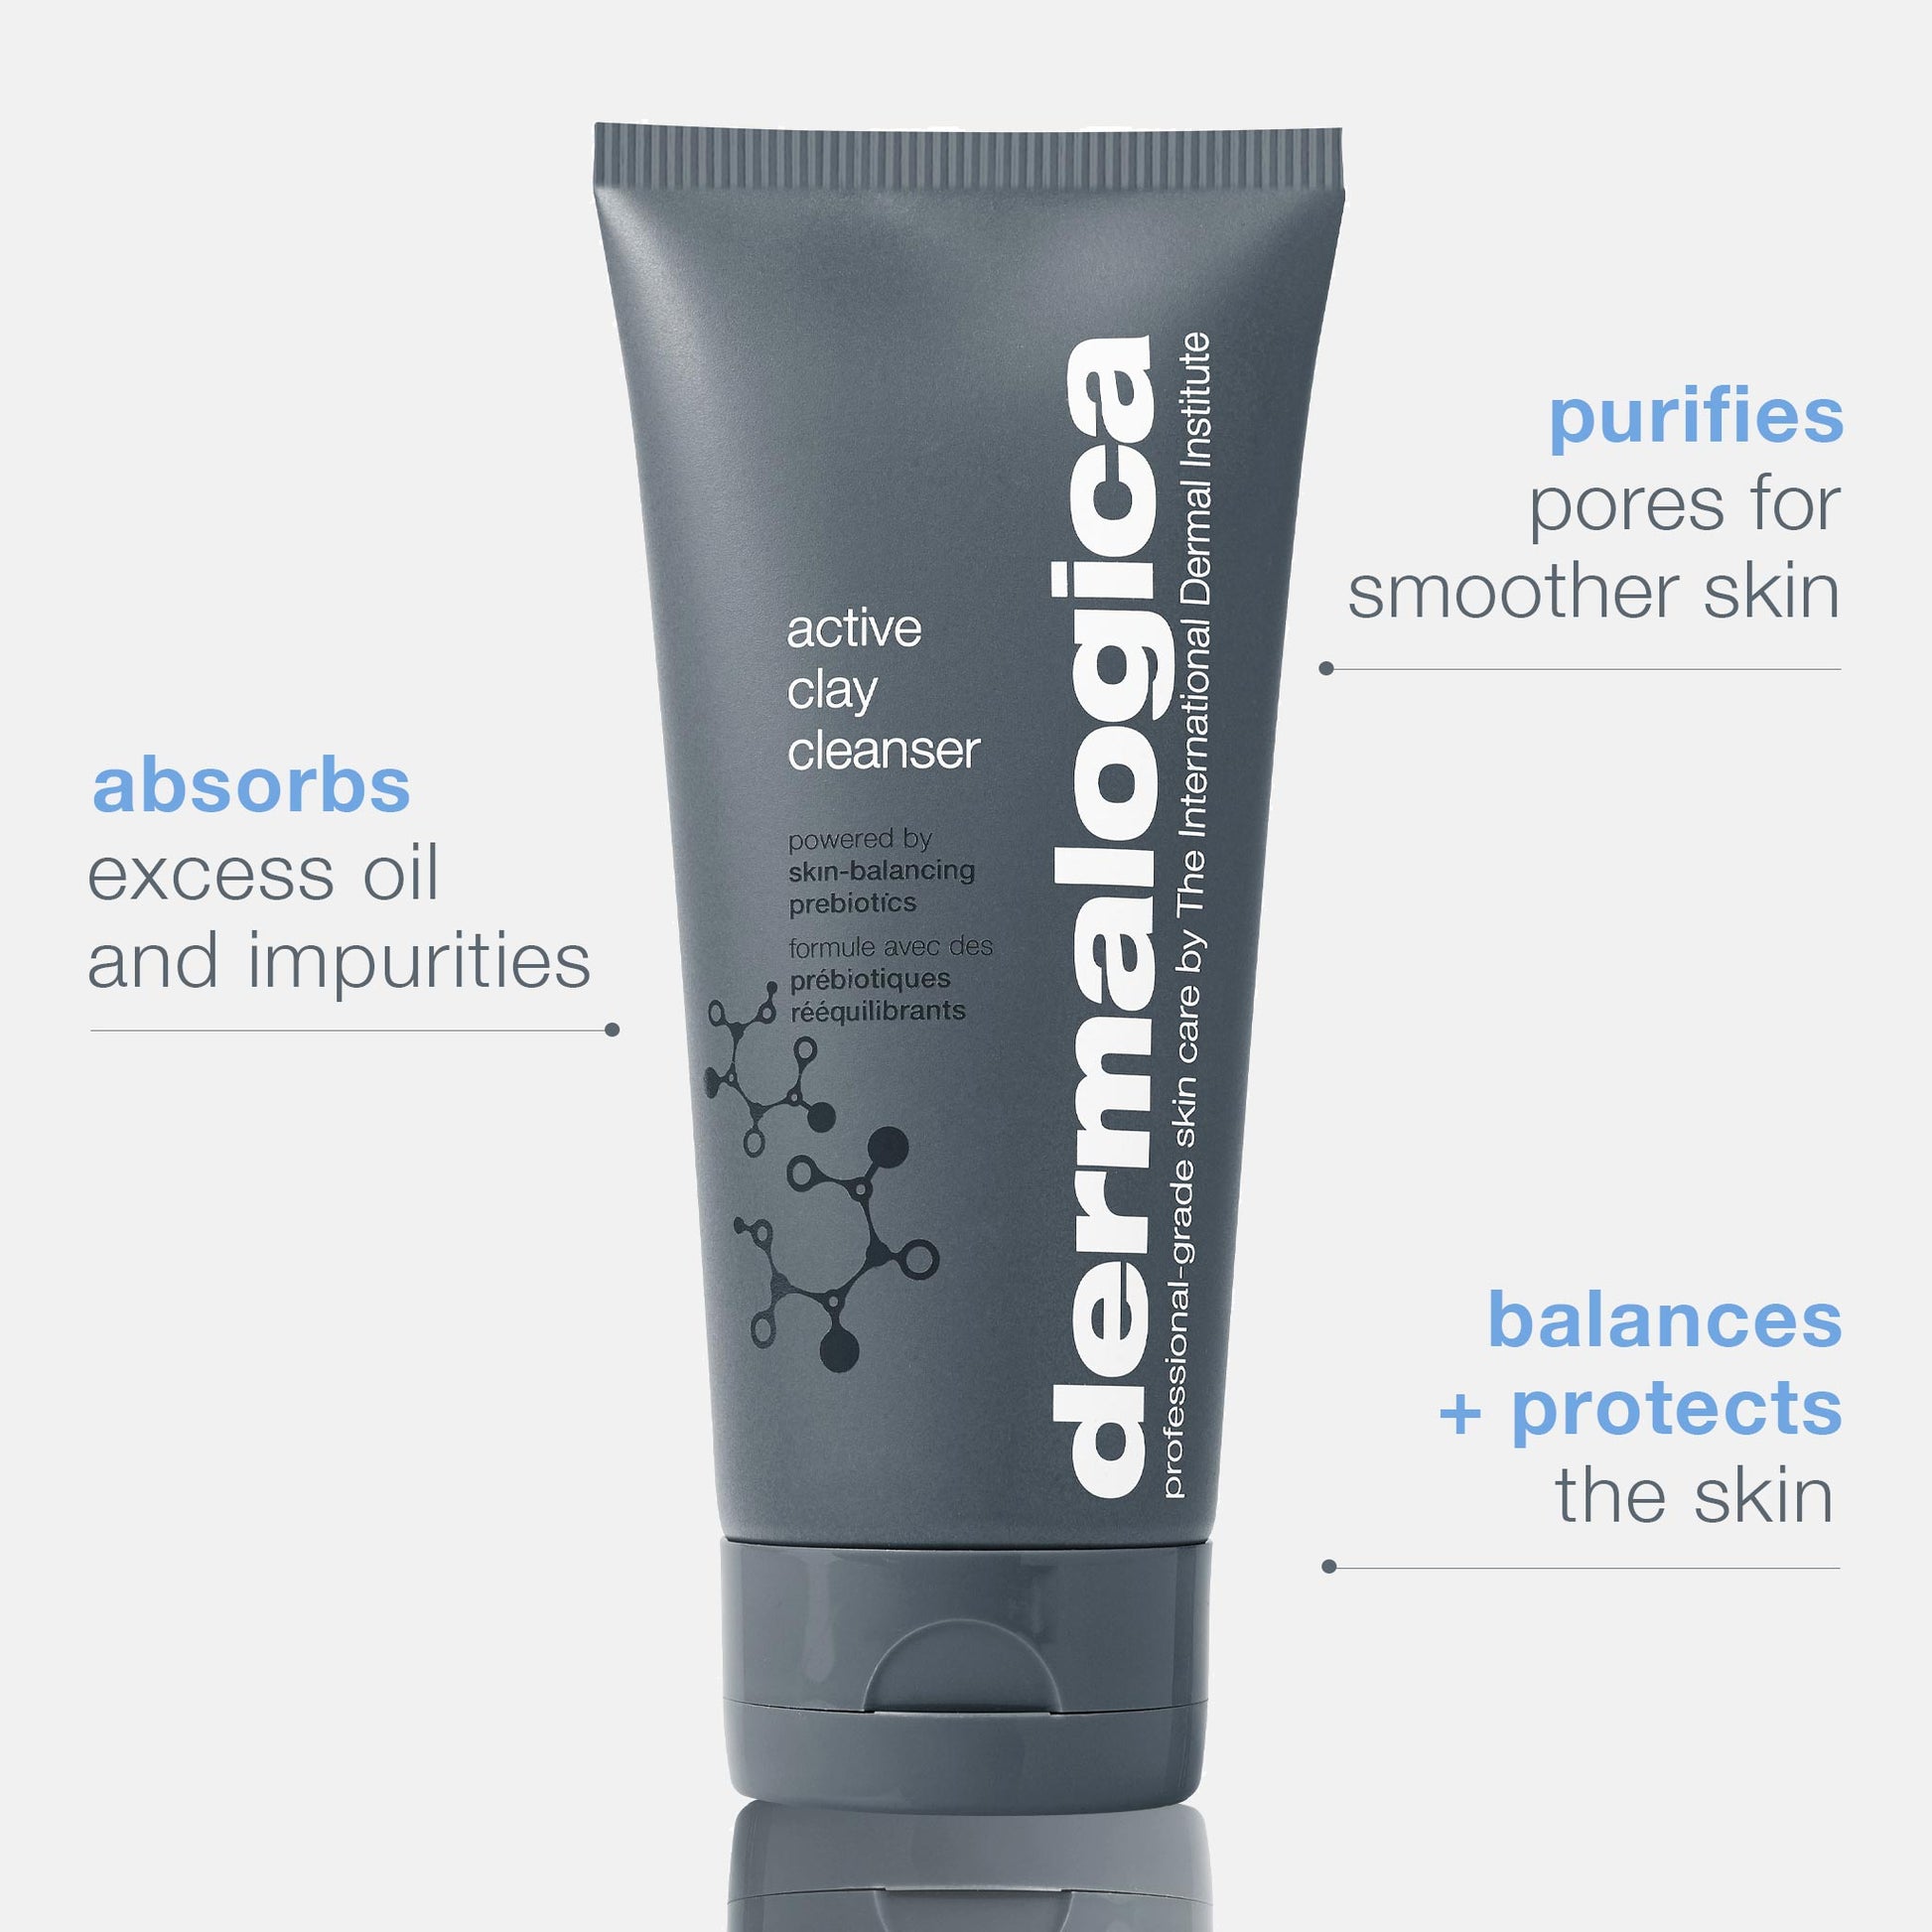 active clay cleanser benefits